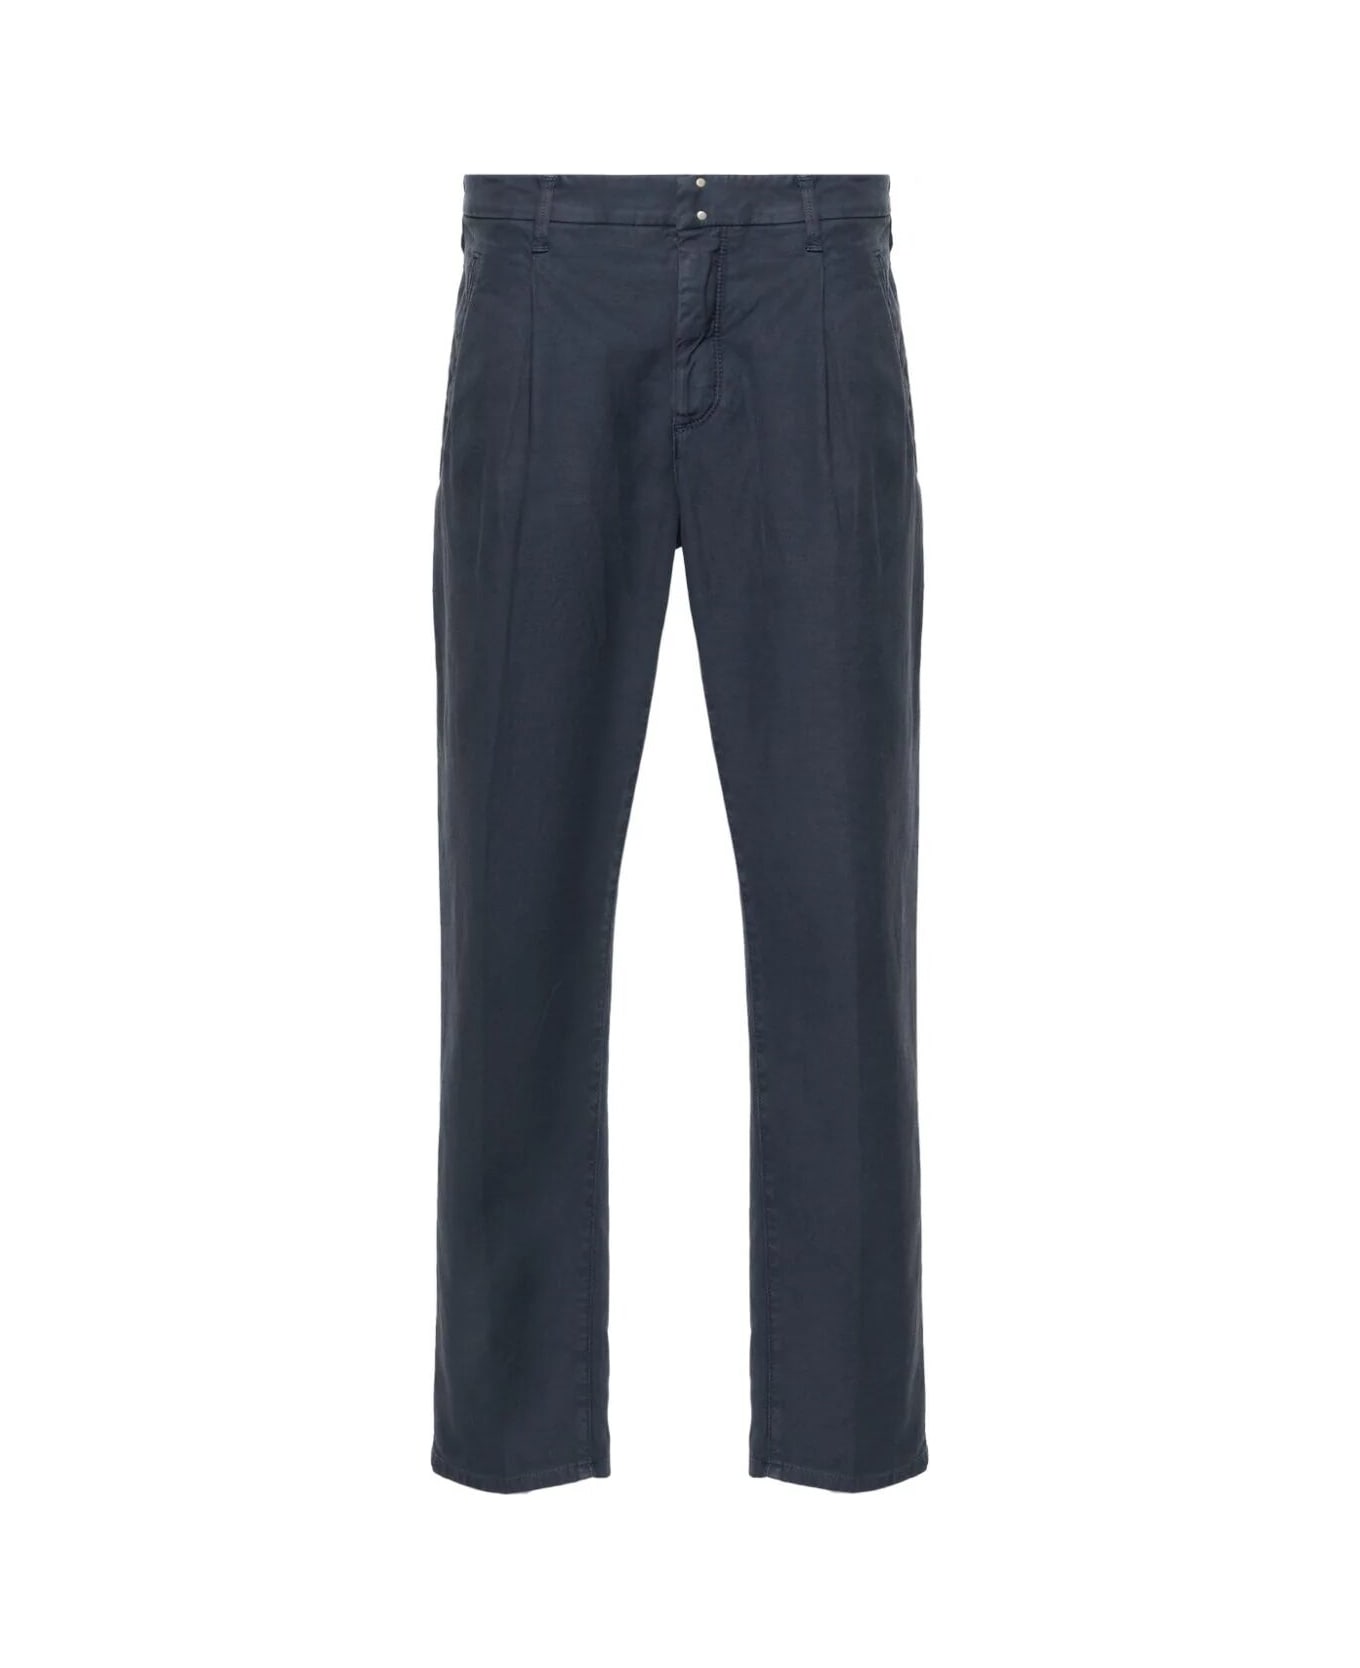 Incotex Special Straight Trouser - Medieval Blue ボトムス